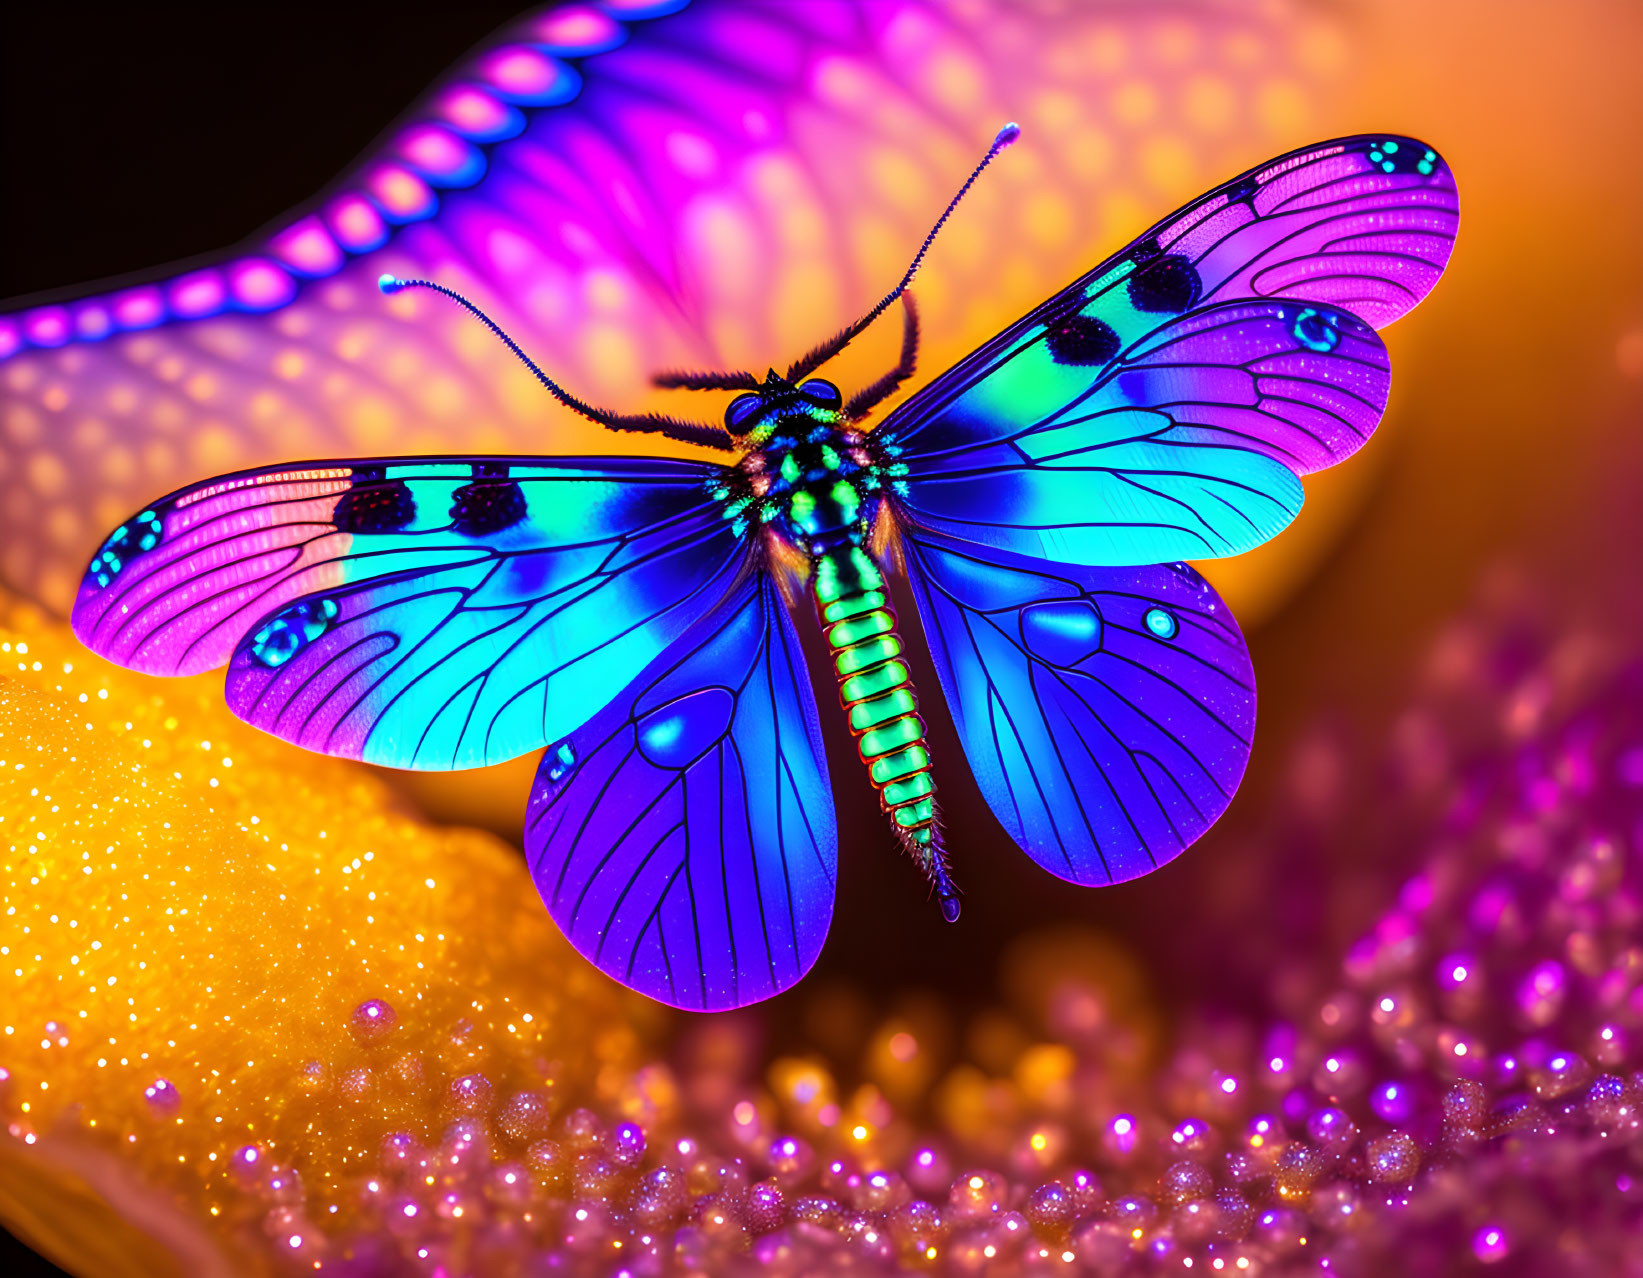 Colorful Butterfly on Glittering Surface with Iridescent Hues